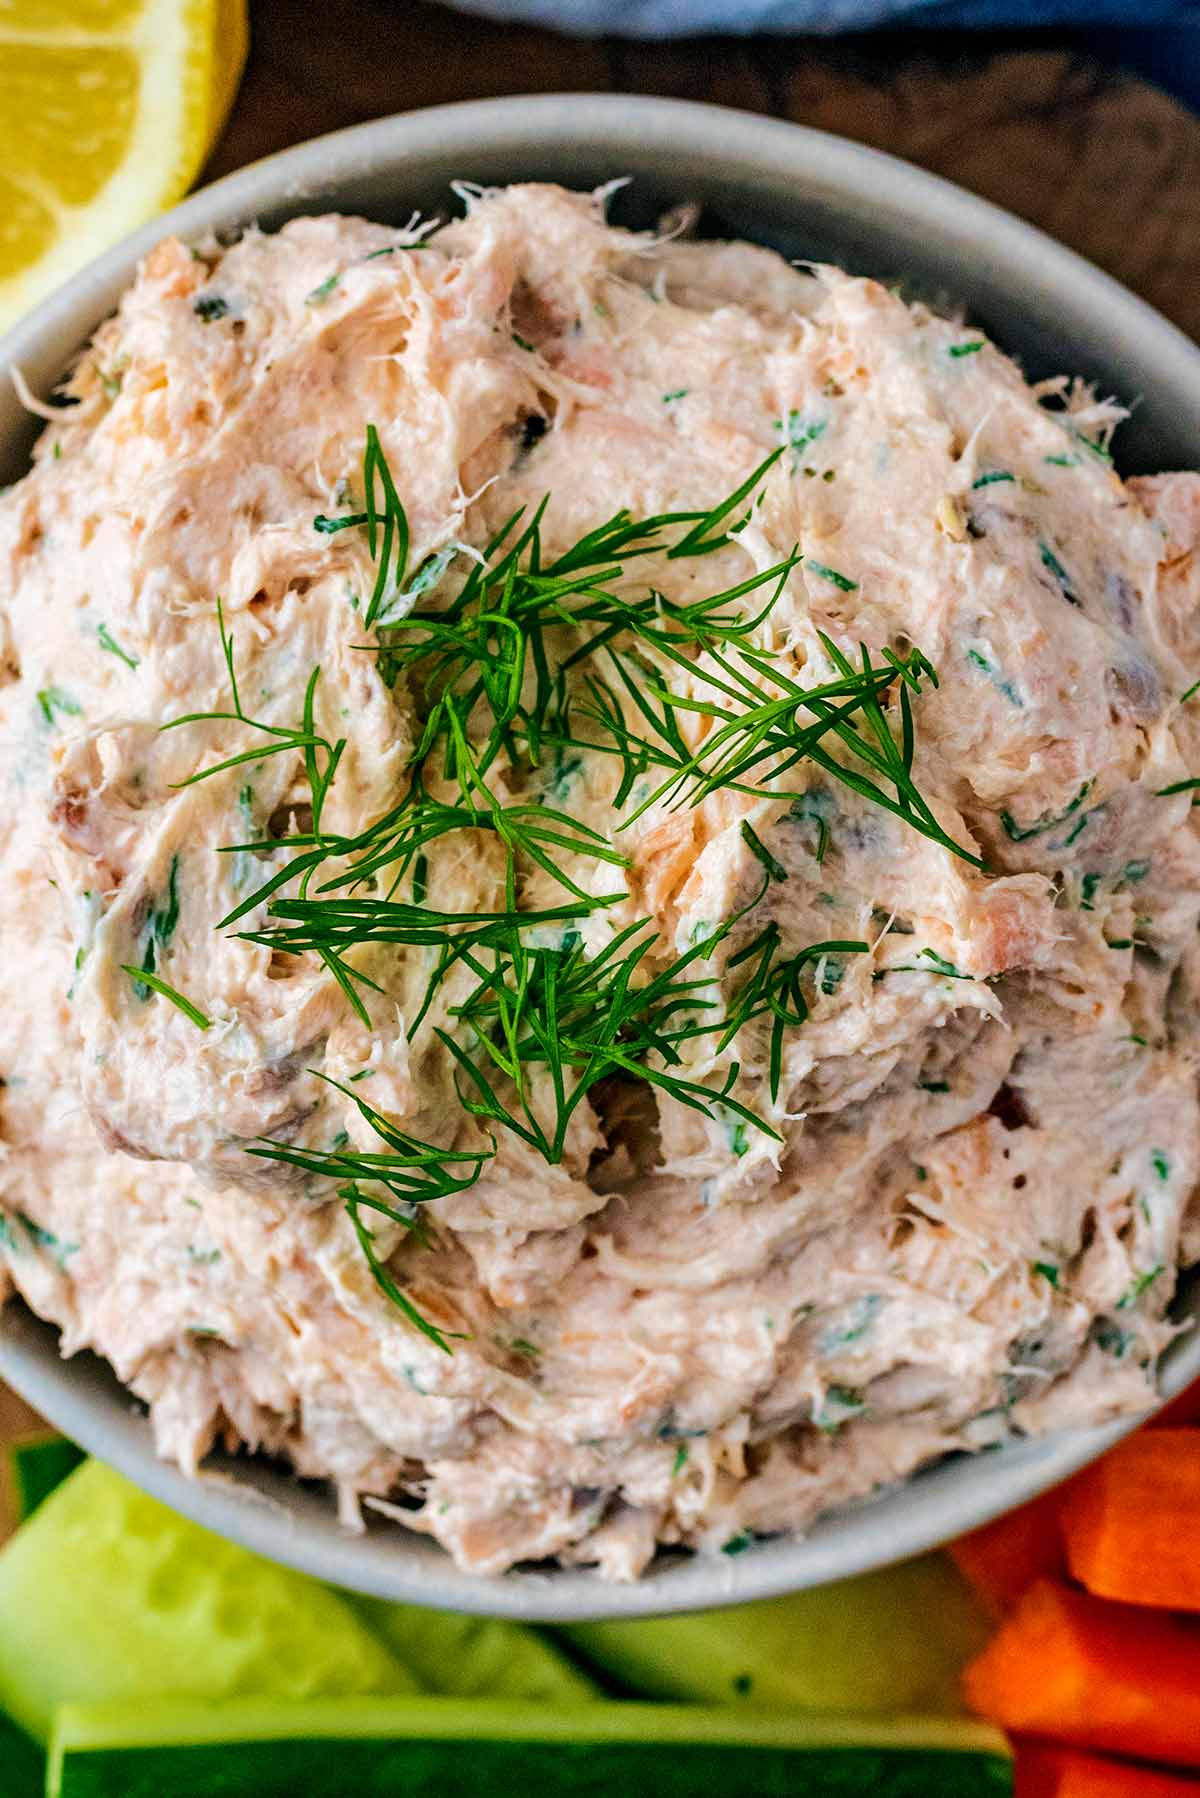 A bowl of pate with chopped dill on top.